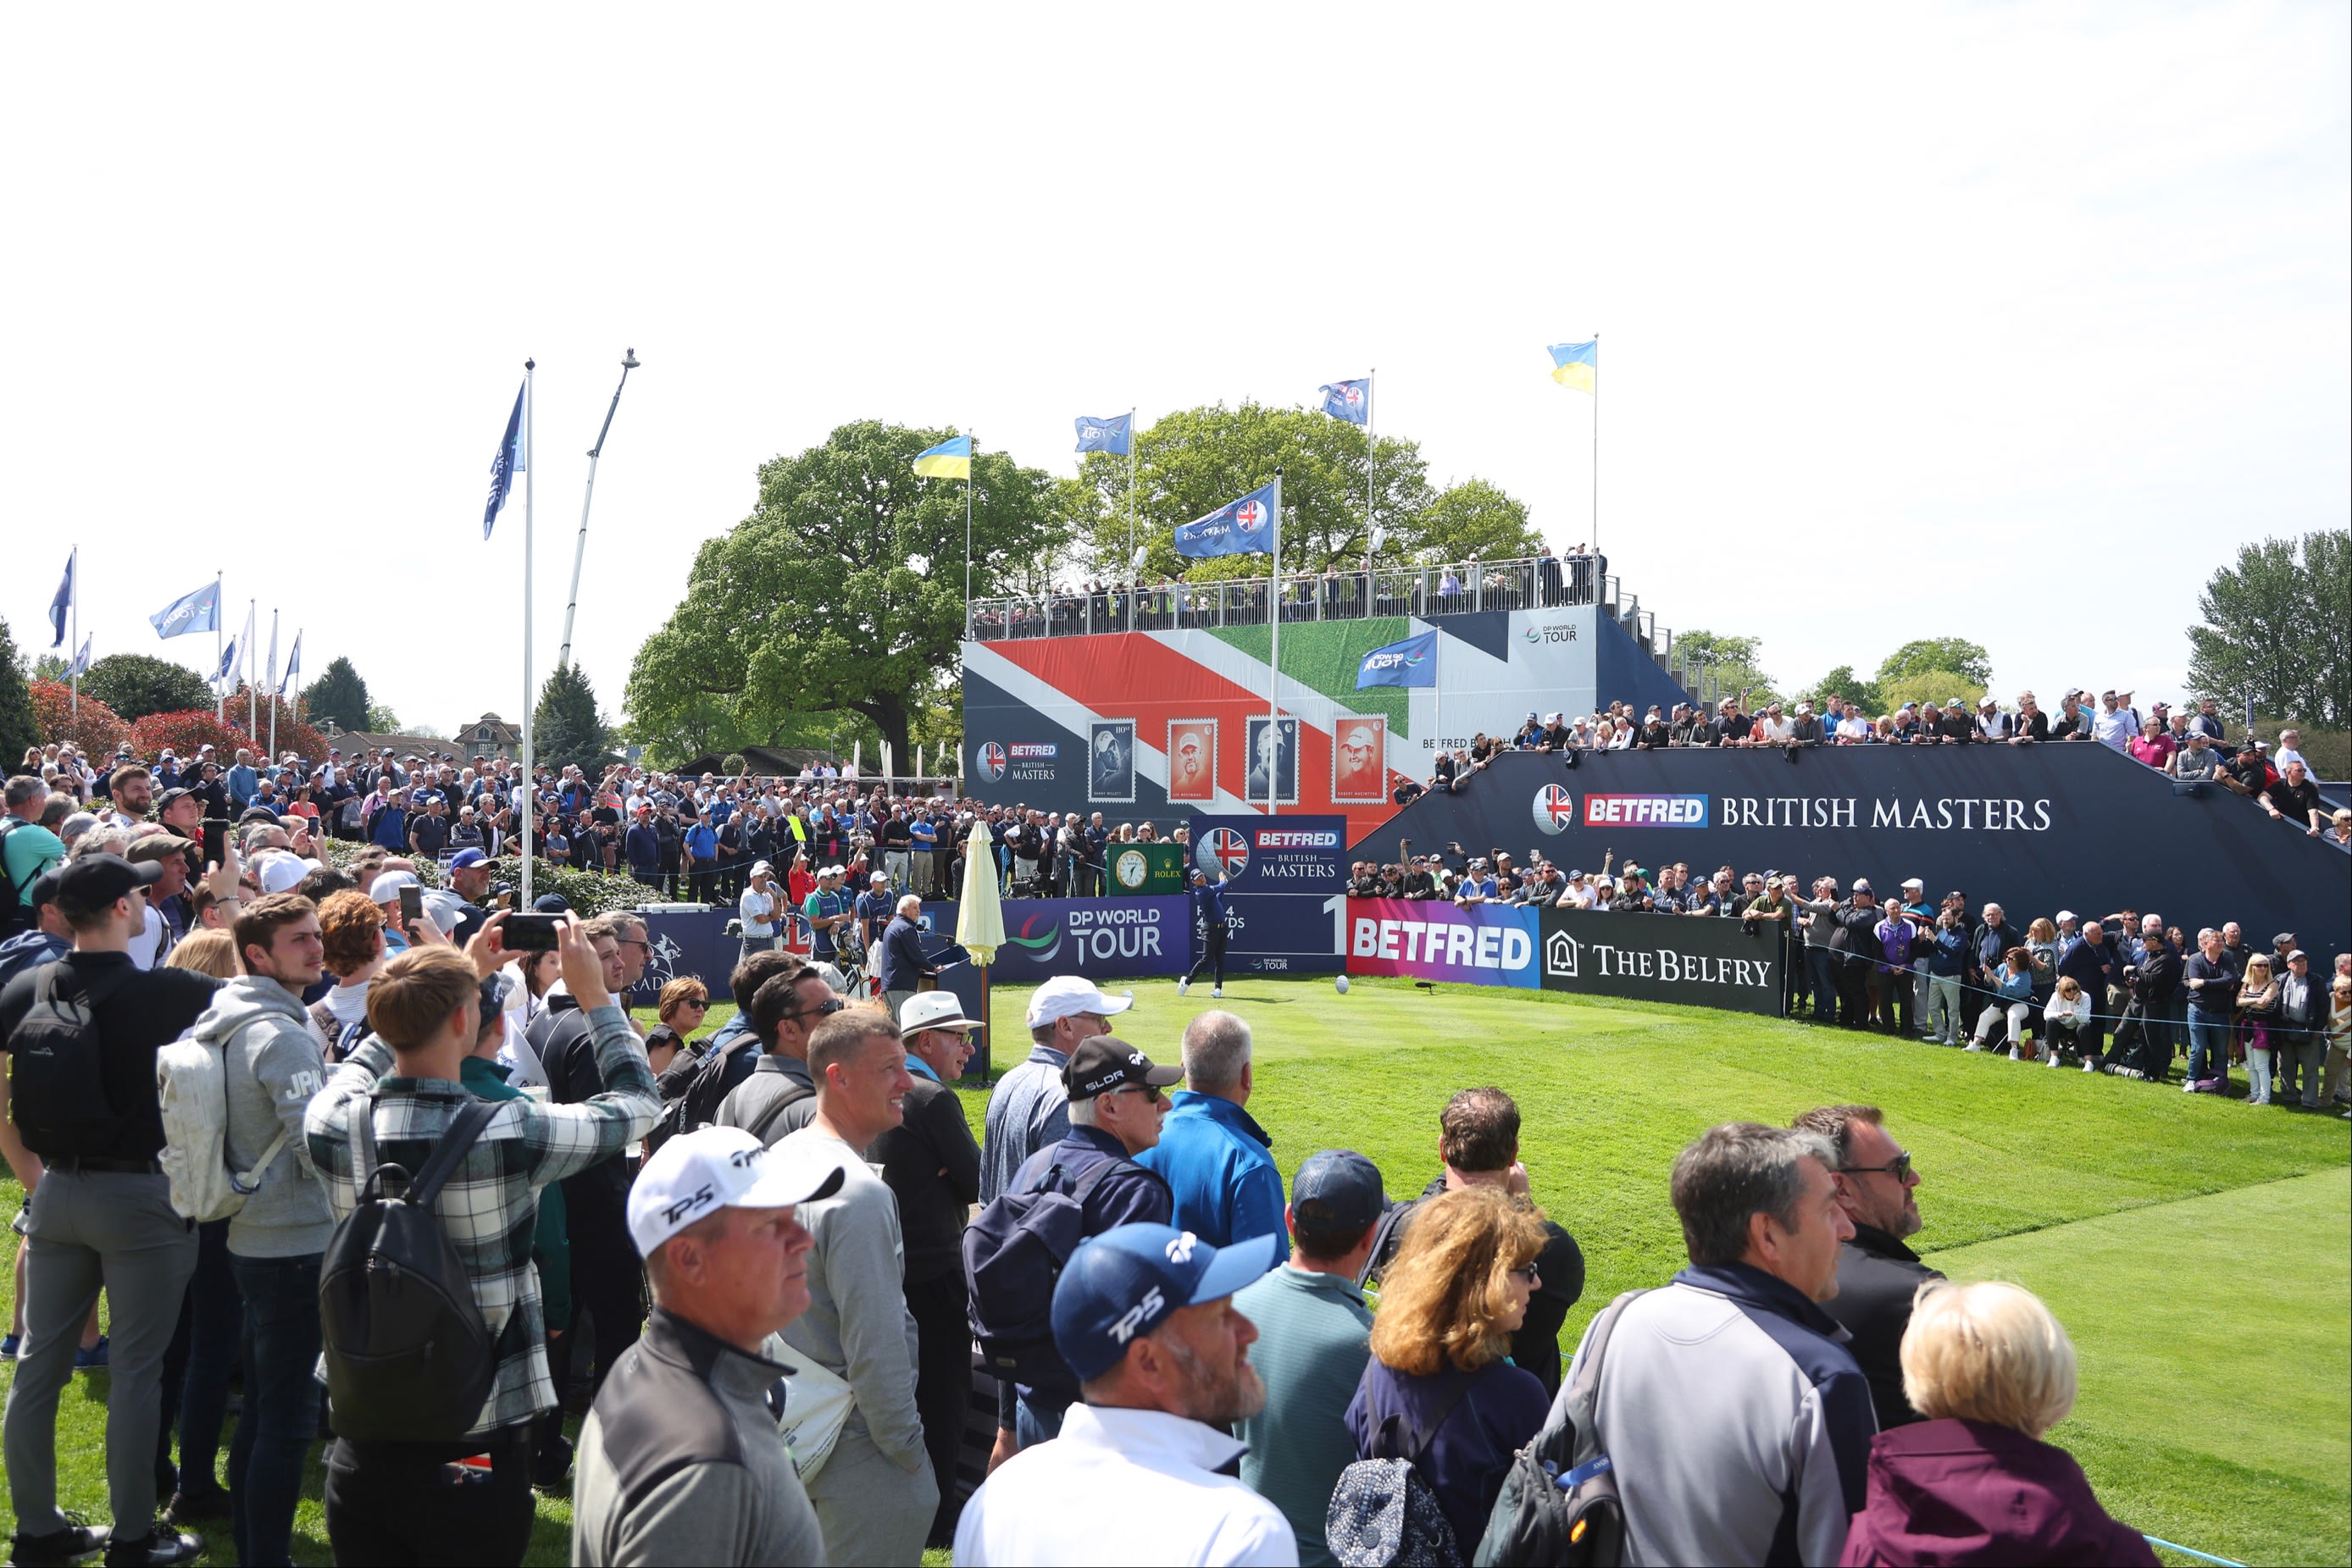 The first hole at the 2022 Betfred British Masters, The Belfry